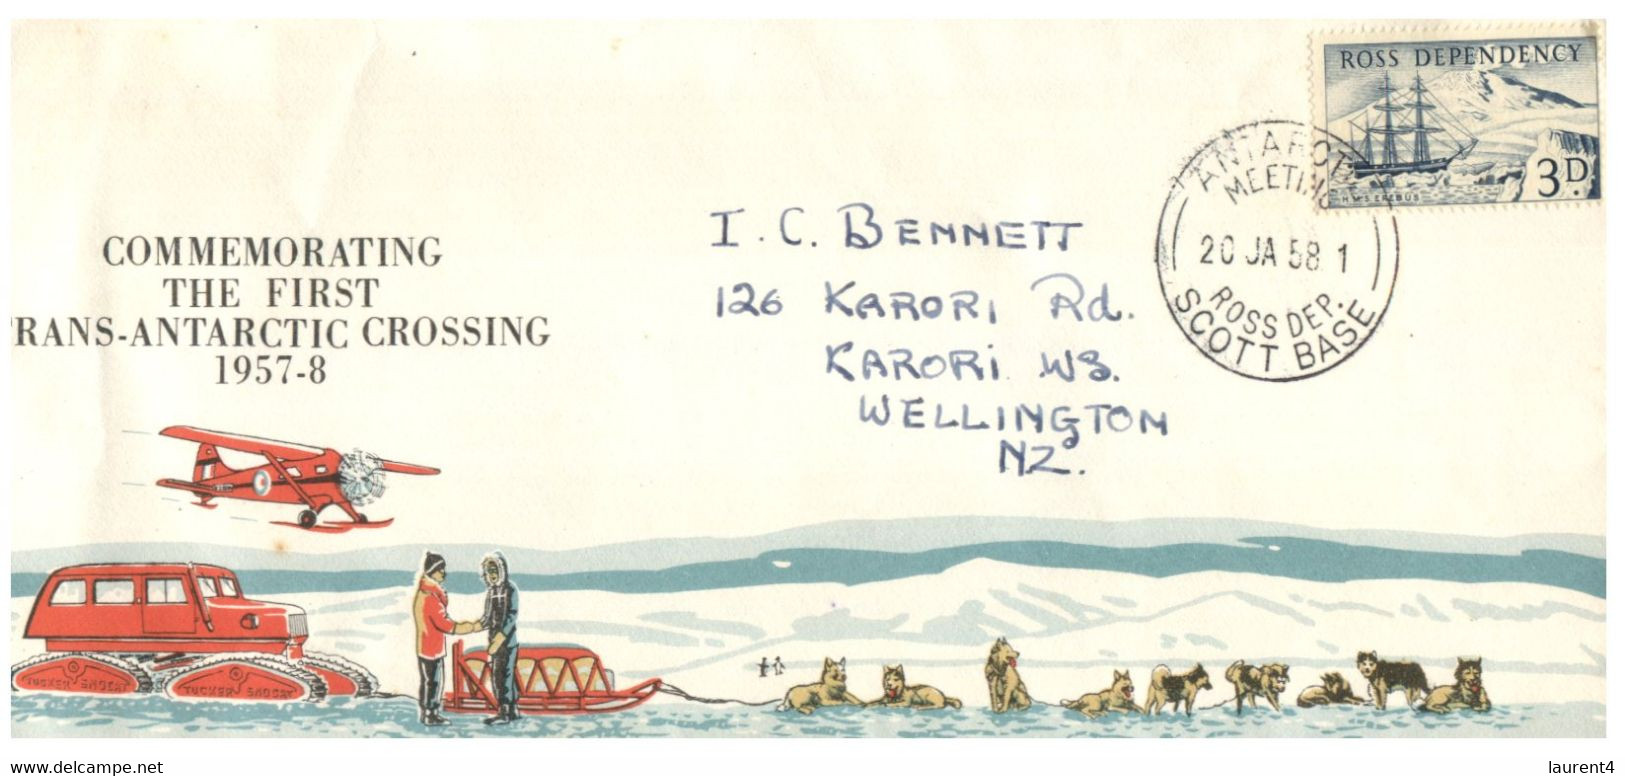 (NN 30) Ross Dependency Cover (New Zealand) - Commemorating The First Trans-Antarctic Crossing 1957-58 - Storia Postale